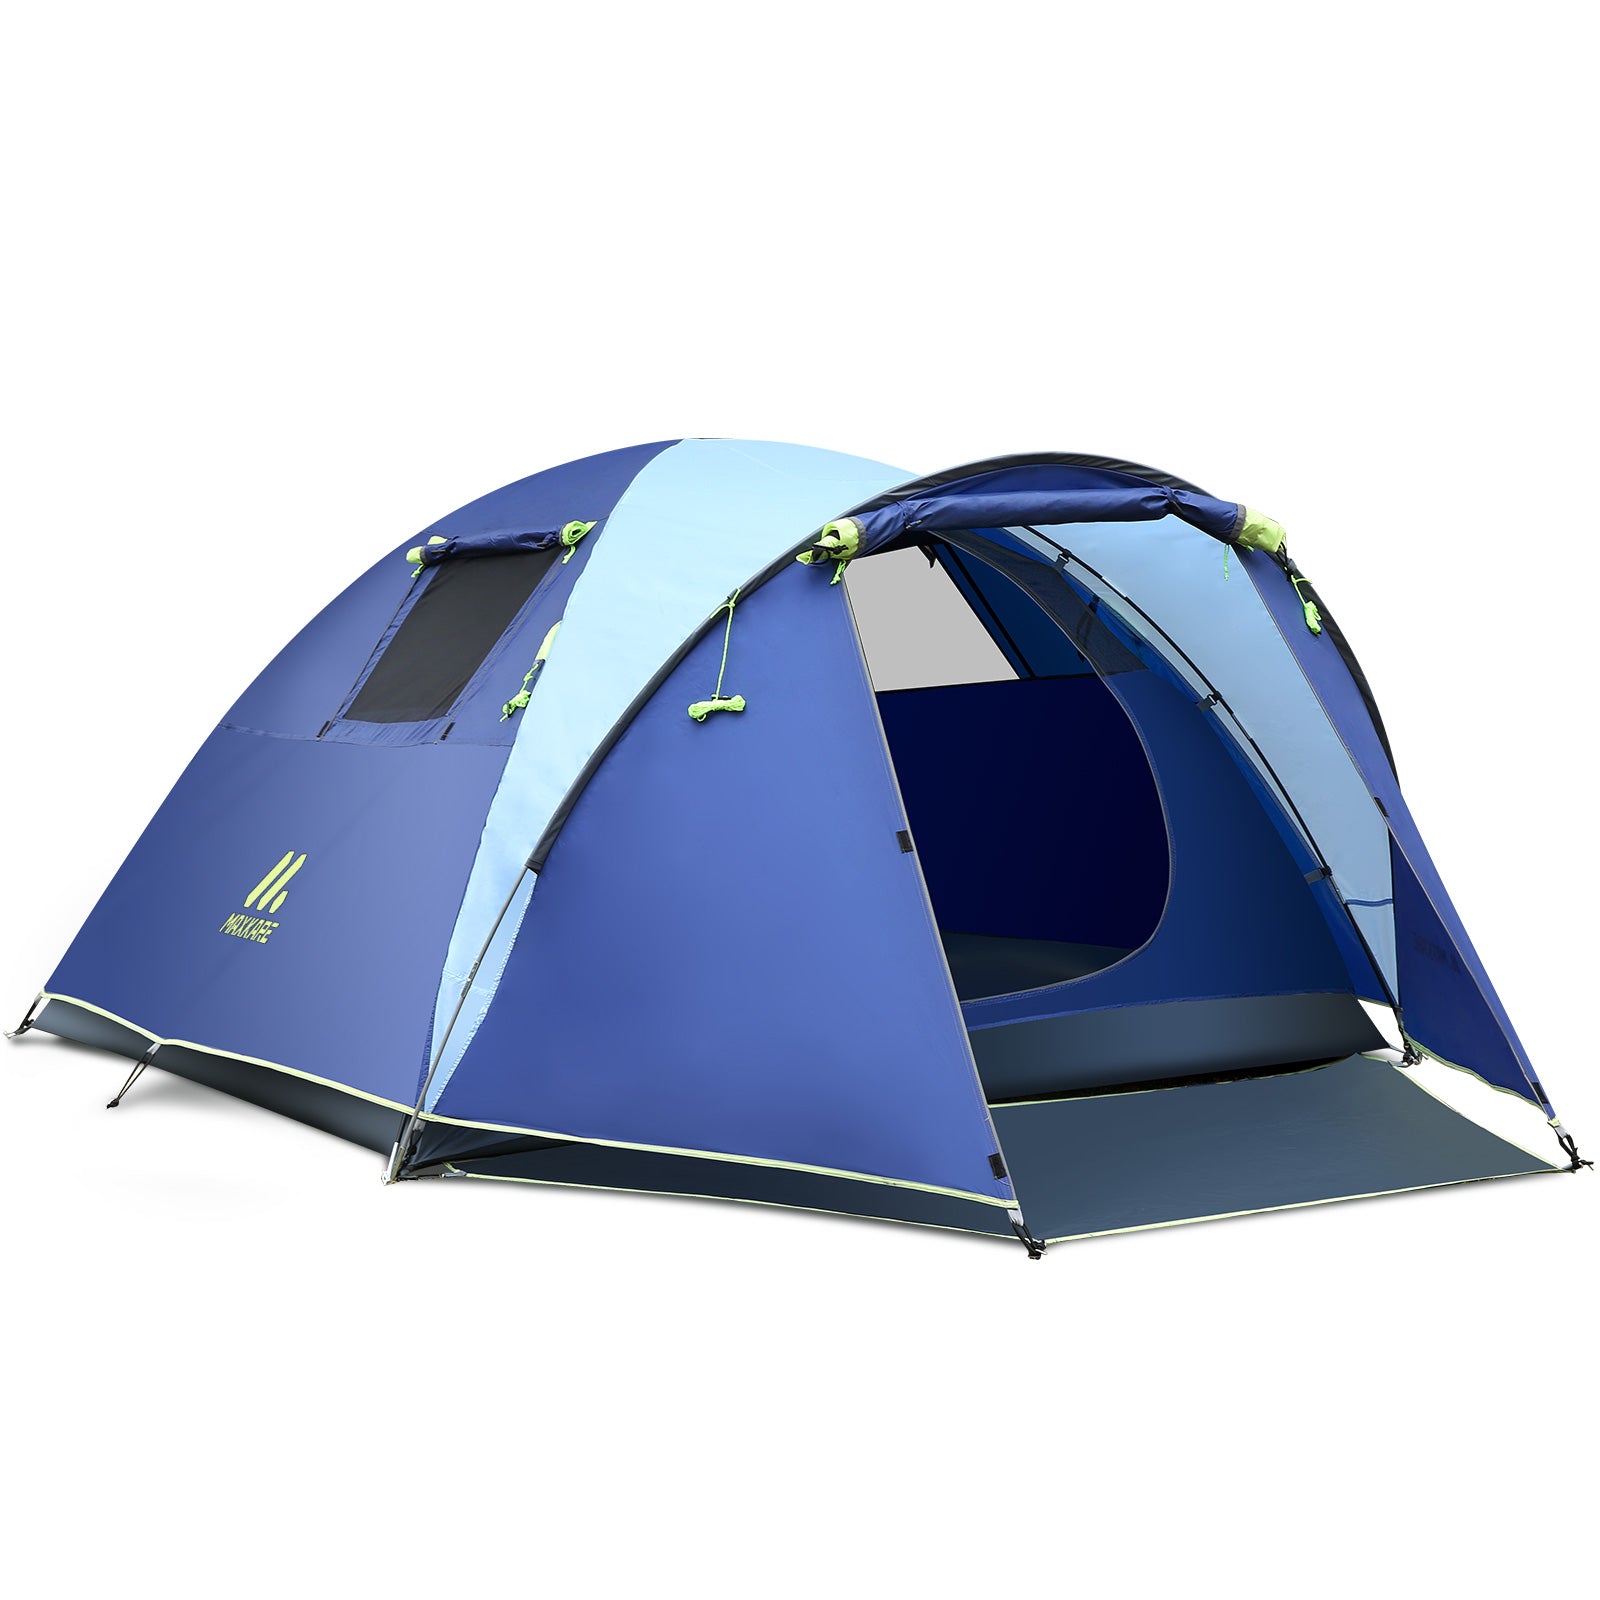 Load image into Gallery viewer, Dome Tent 4 Person Camp Tent with Porch, Rainfly, Easy Set Up for Camping, Backpacking &amp; Hiking, Fishing Outdoor - Blue
